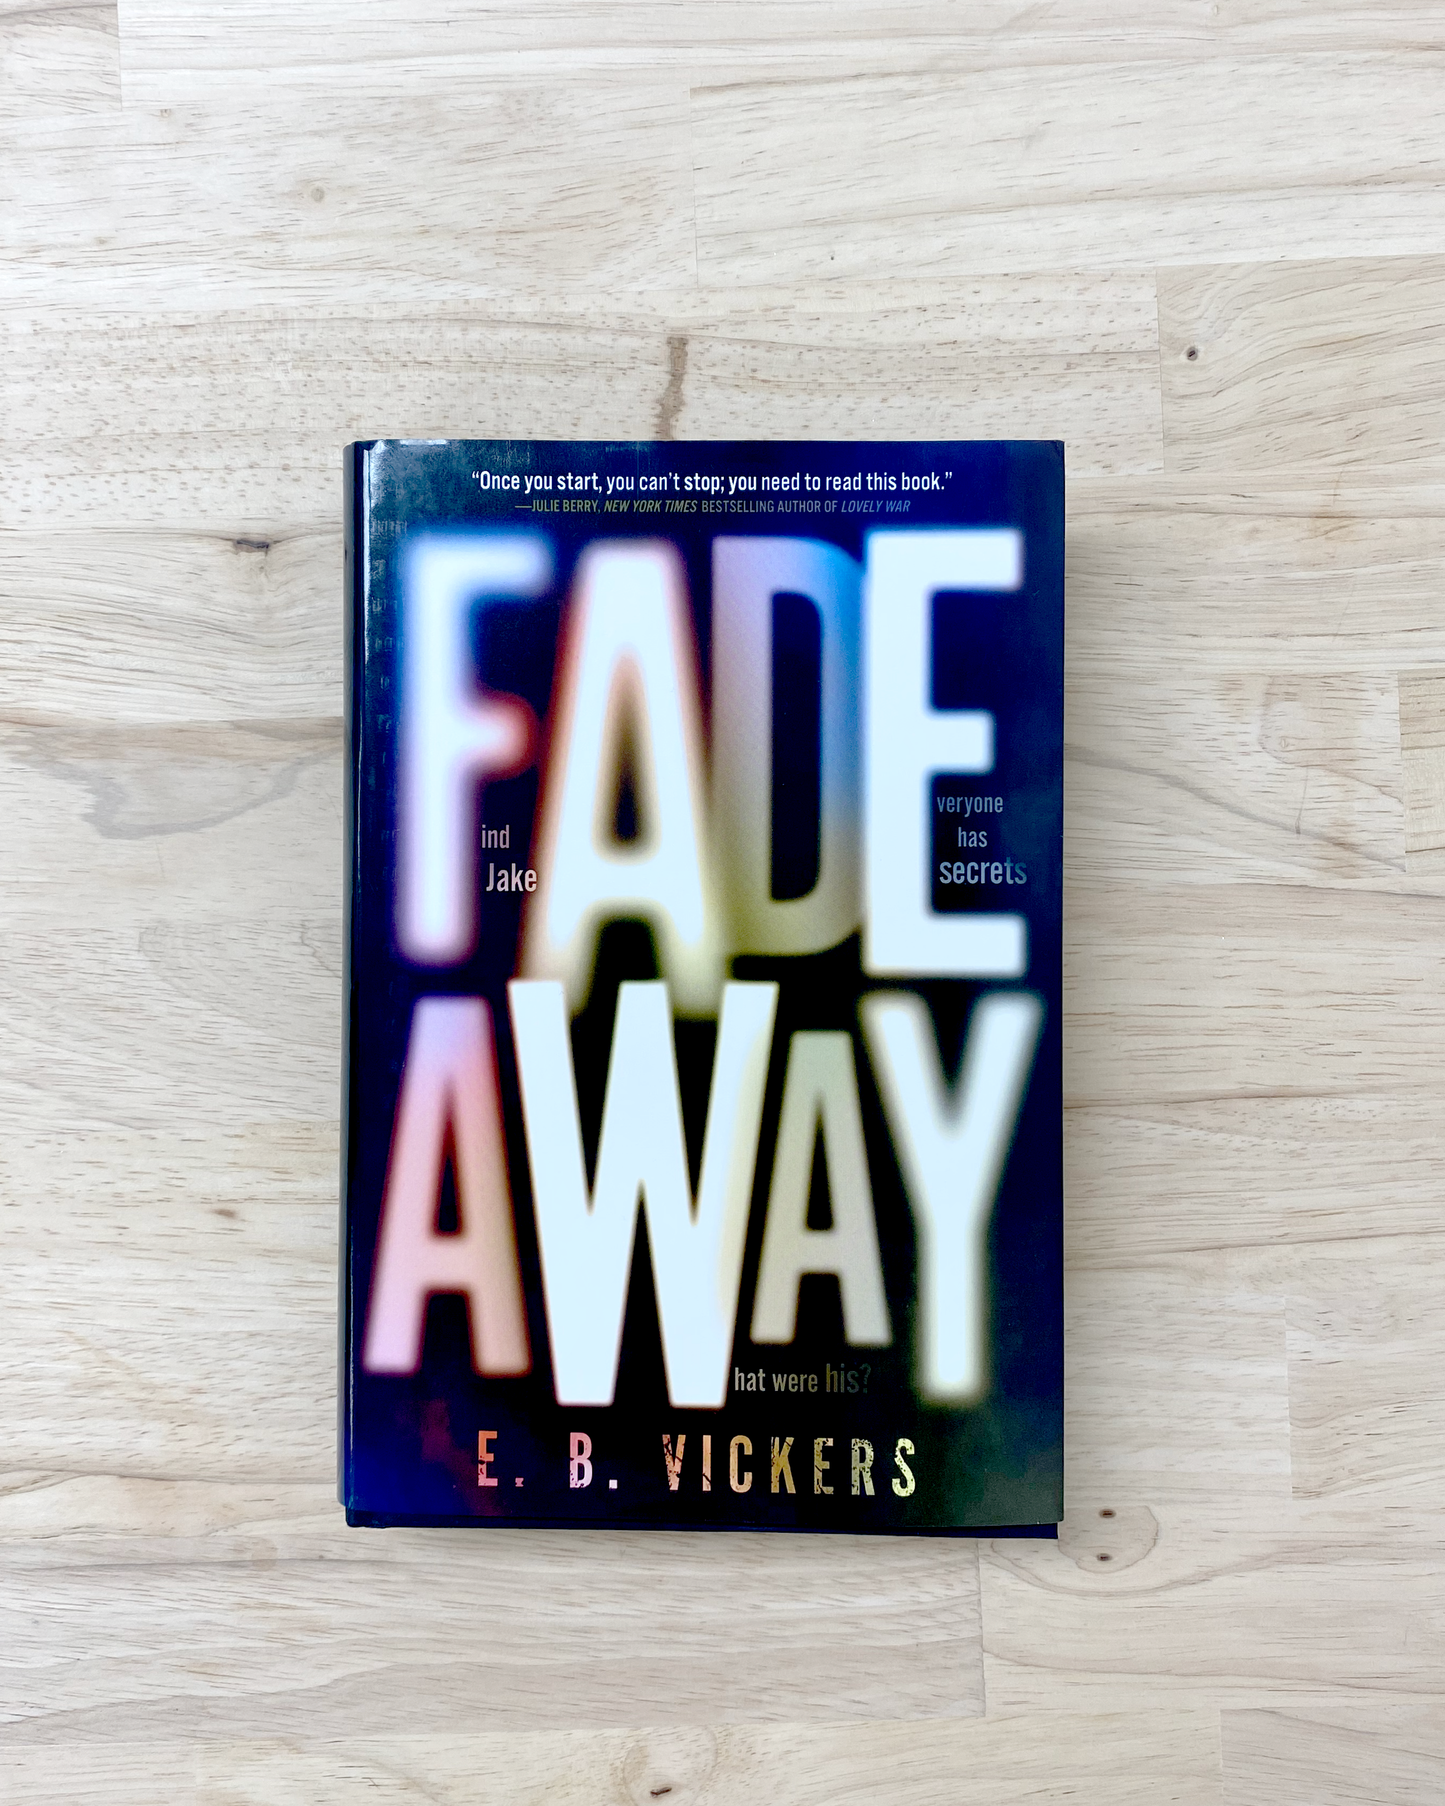 Fadeaway- Author Signed Copy